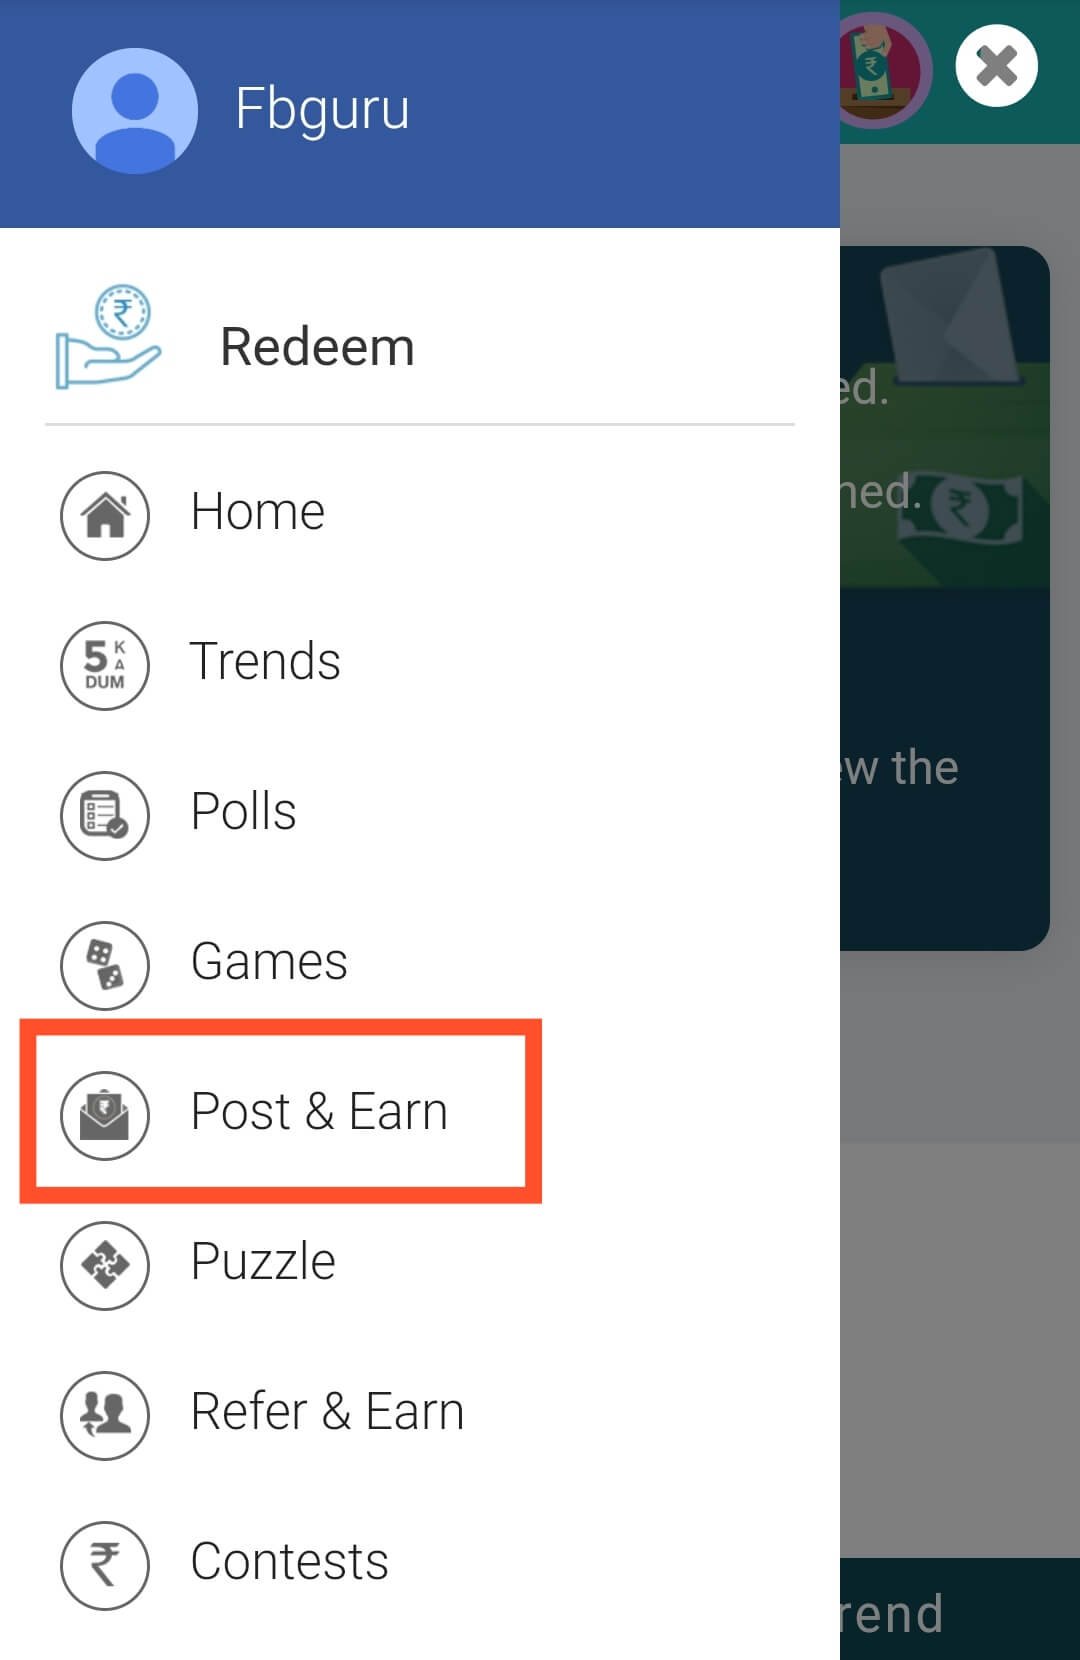 Post and Earn